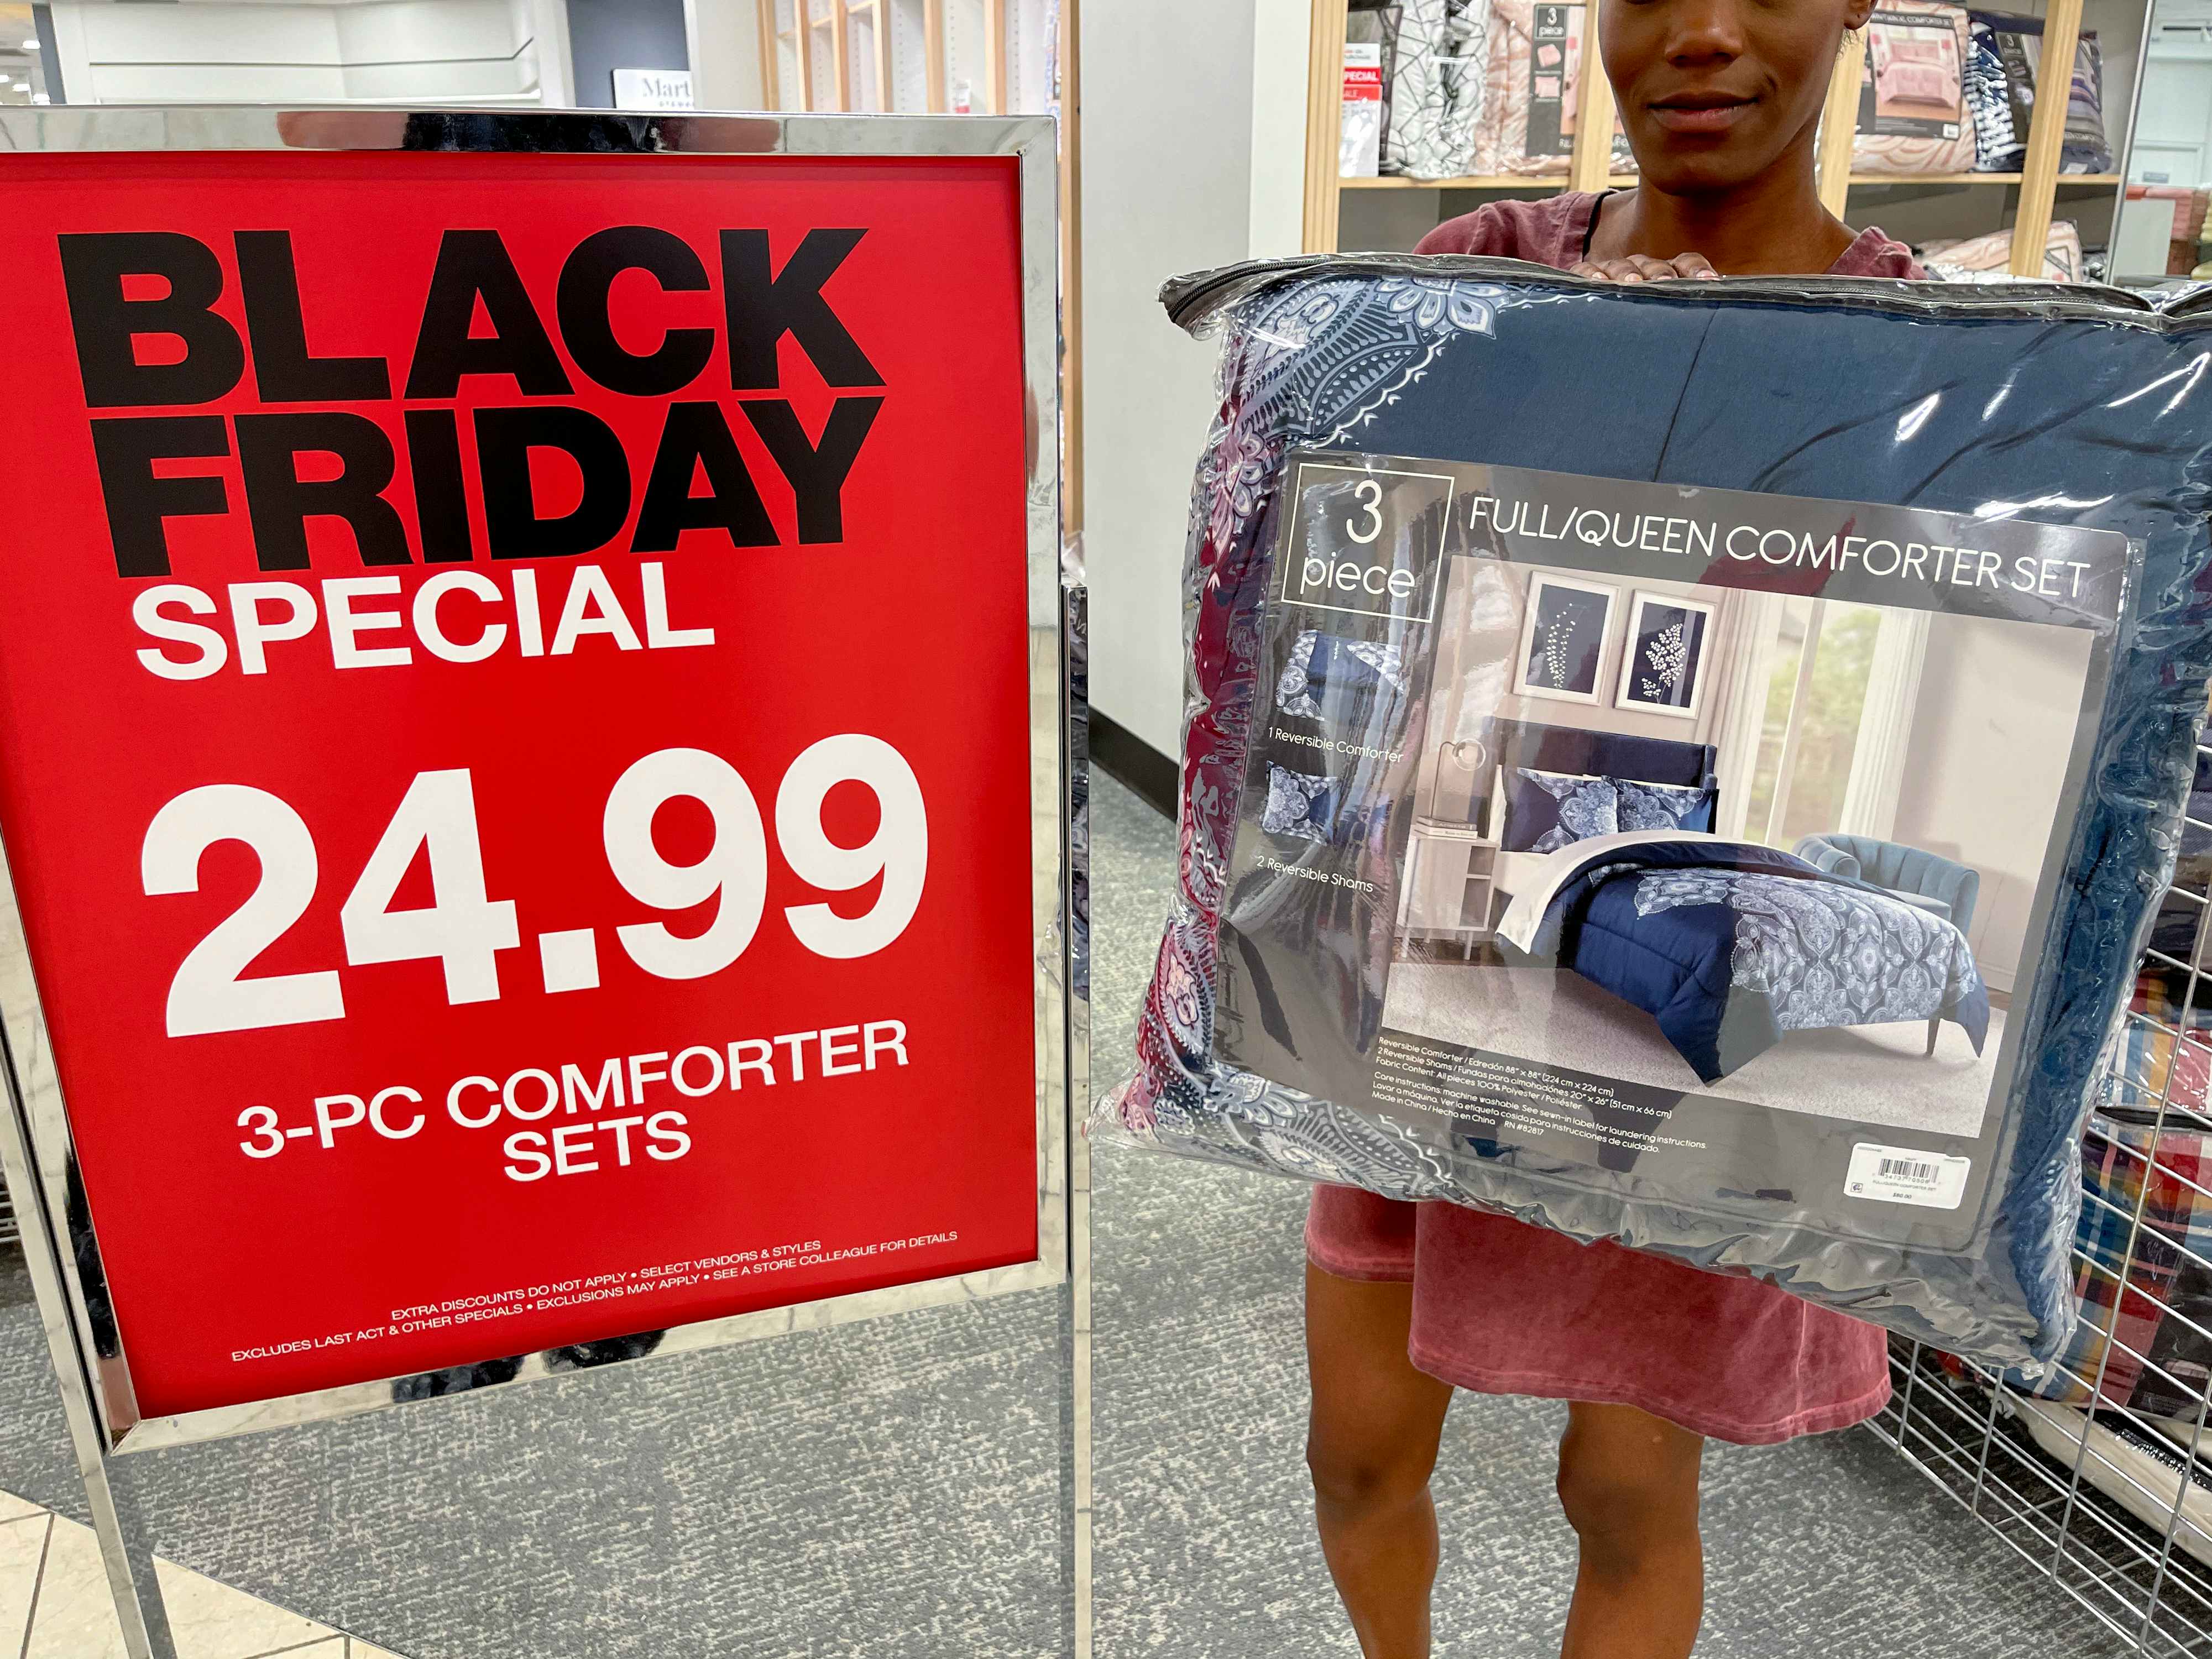 macy bedding being held by black friday signage 